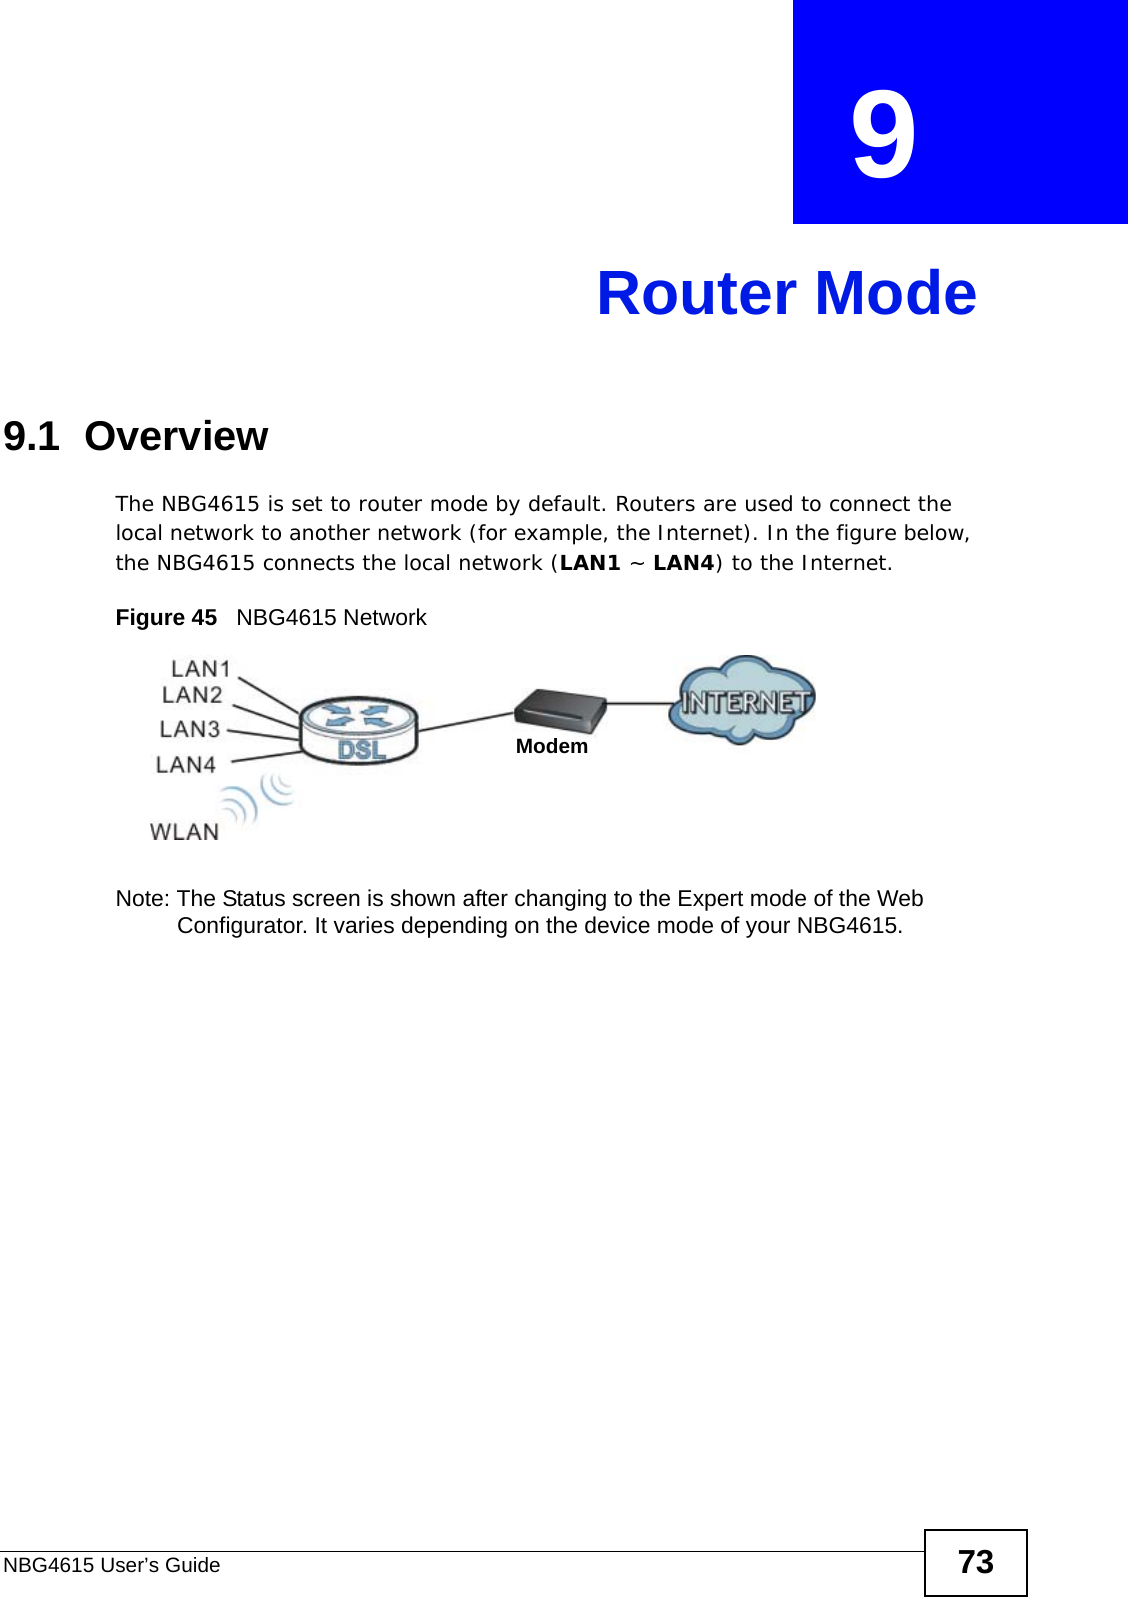 NBG4615 User’s Guide 73CHAPTER  9 Router Mode9.1  OverviewThe NBG4615 is set to router mode by default. Routers are used to connect the local network to another network (for example, the Internet). In the figure below, the NBG4615 connects the local network (LAN1 ~ LAN4) to the Internet.Figure 45   NBG4615 NetworkNote: The Status screen is shown after changing to the Expert mode of the Web Configurator. It varies depending on the device mode of your NBG4615.Modem